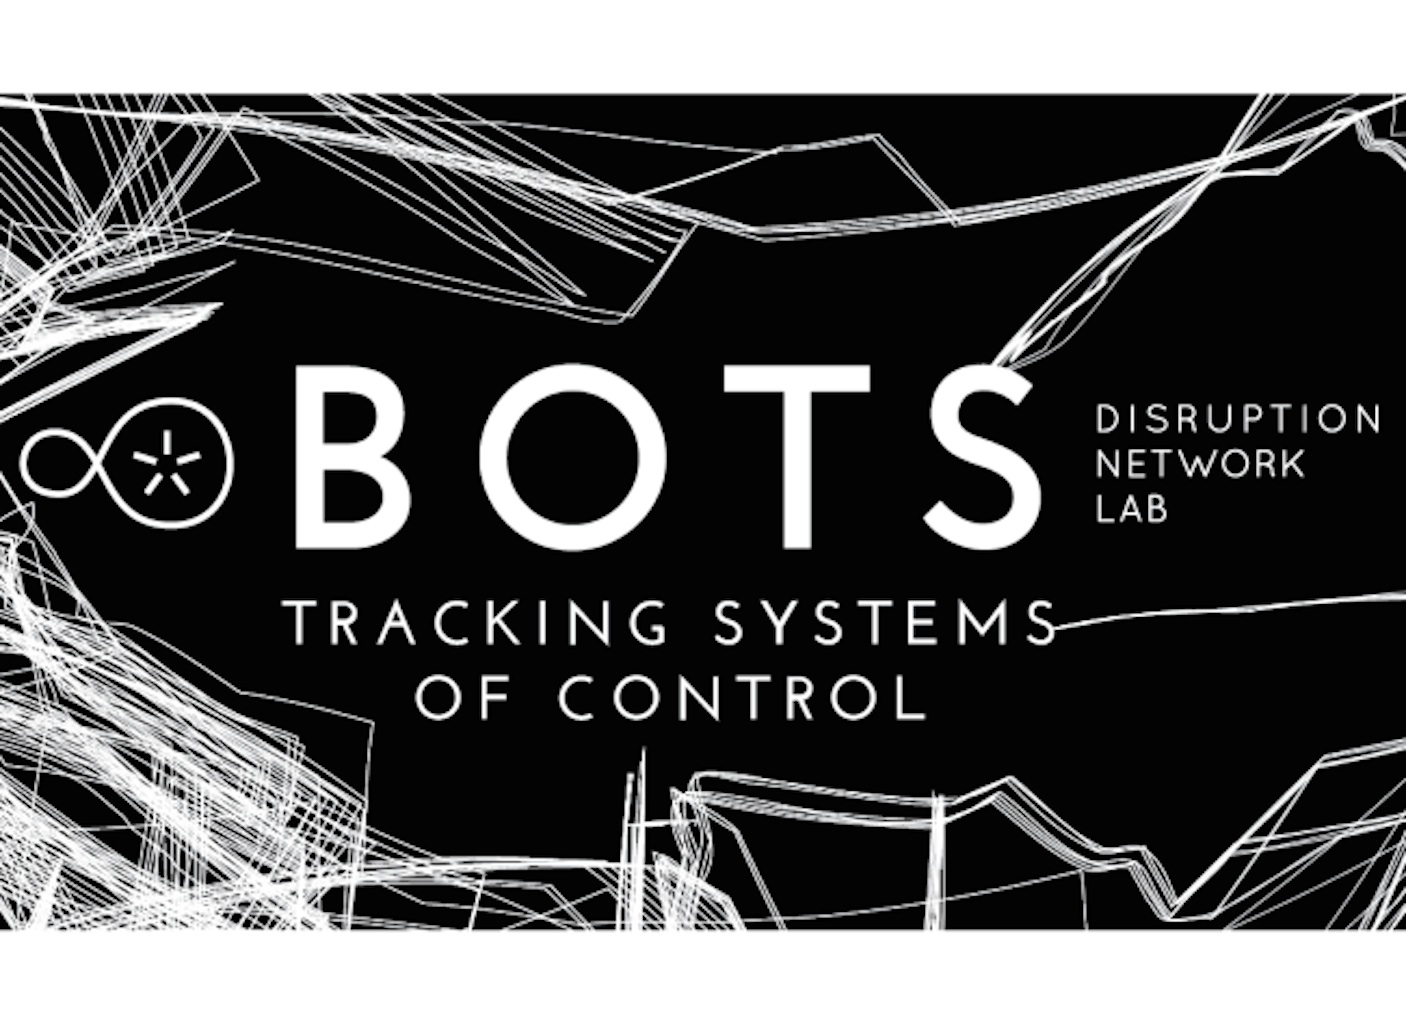 Coming Soon, Coverage of Disruption Network Lab conference on Bots, as part of the AND-festival in London